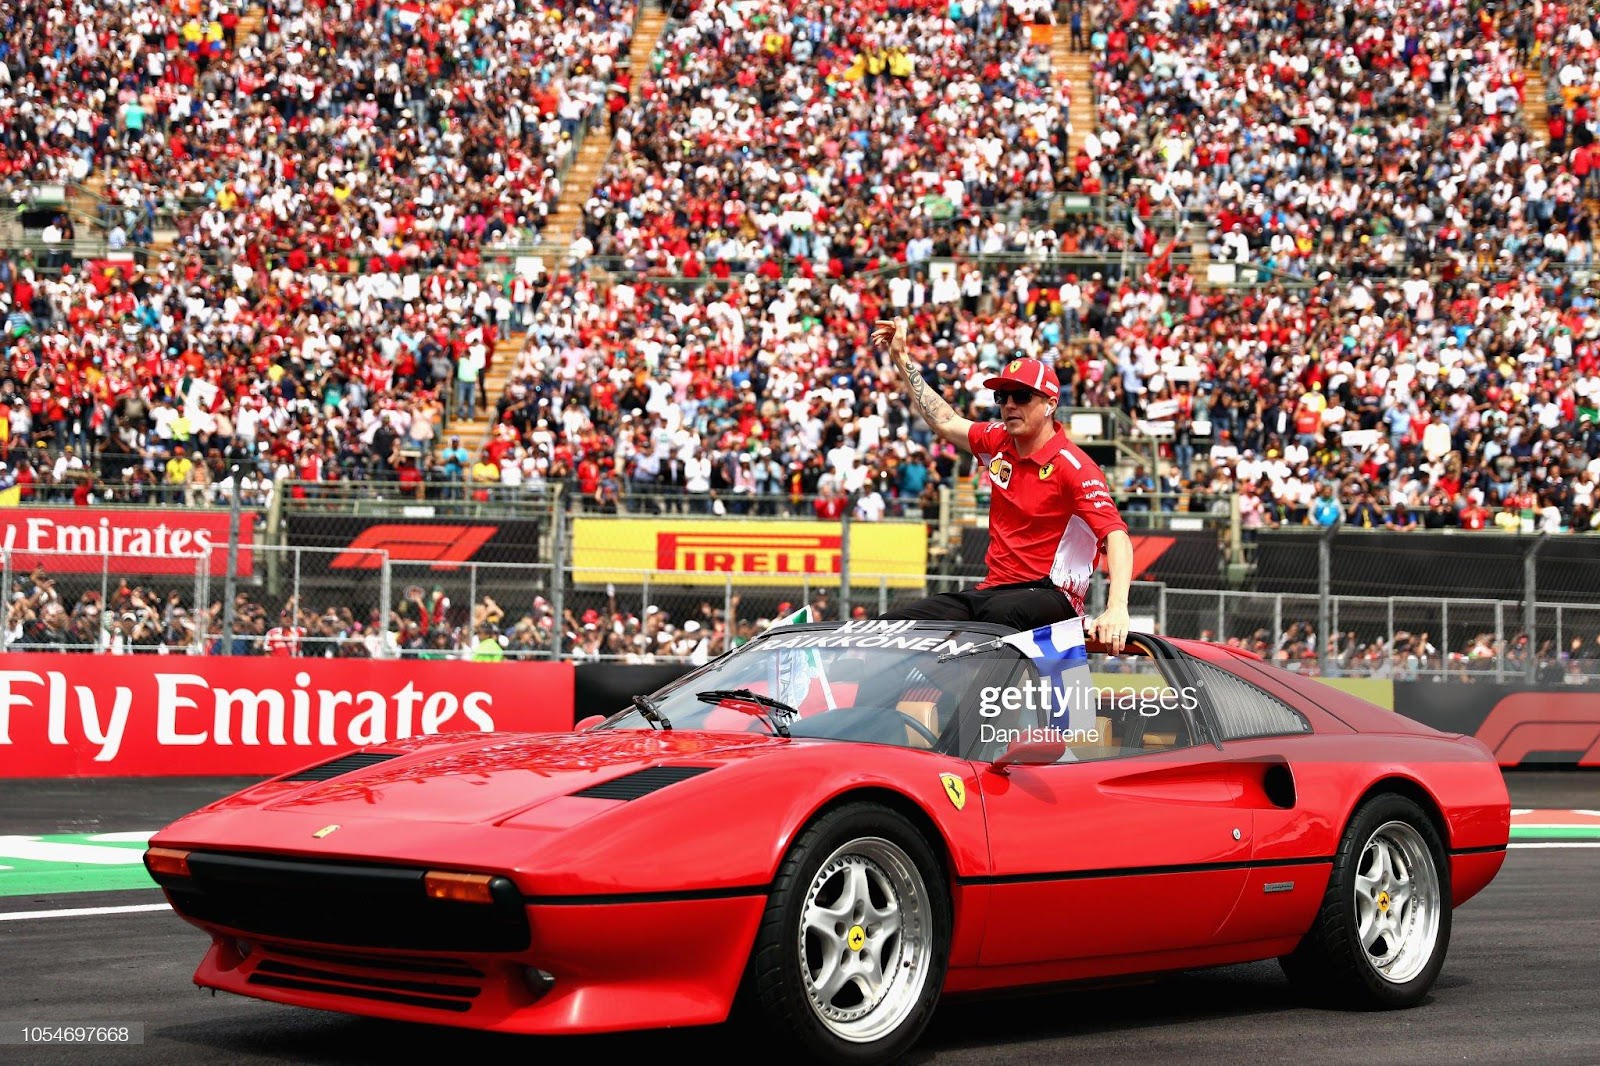 Kimi Raikkonen, Ferrari, waves to the crowd on the drivers parade before the F1 Grand Prix of Mexico at Autodromo Hermanos Rodriguez on October 28, 2018 in Mexico City.